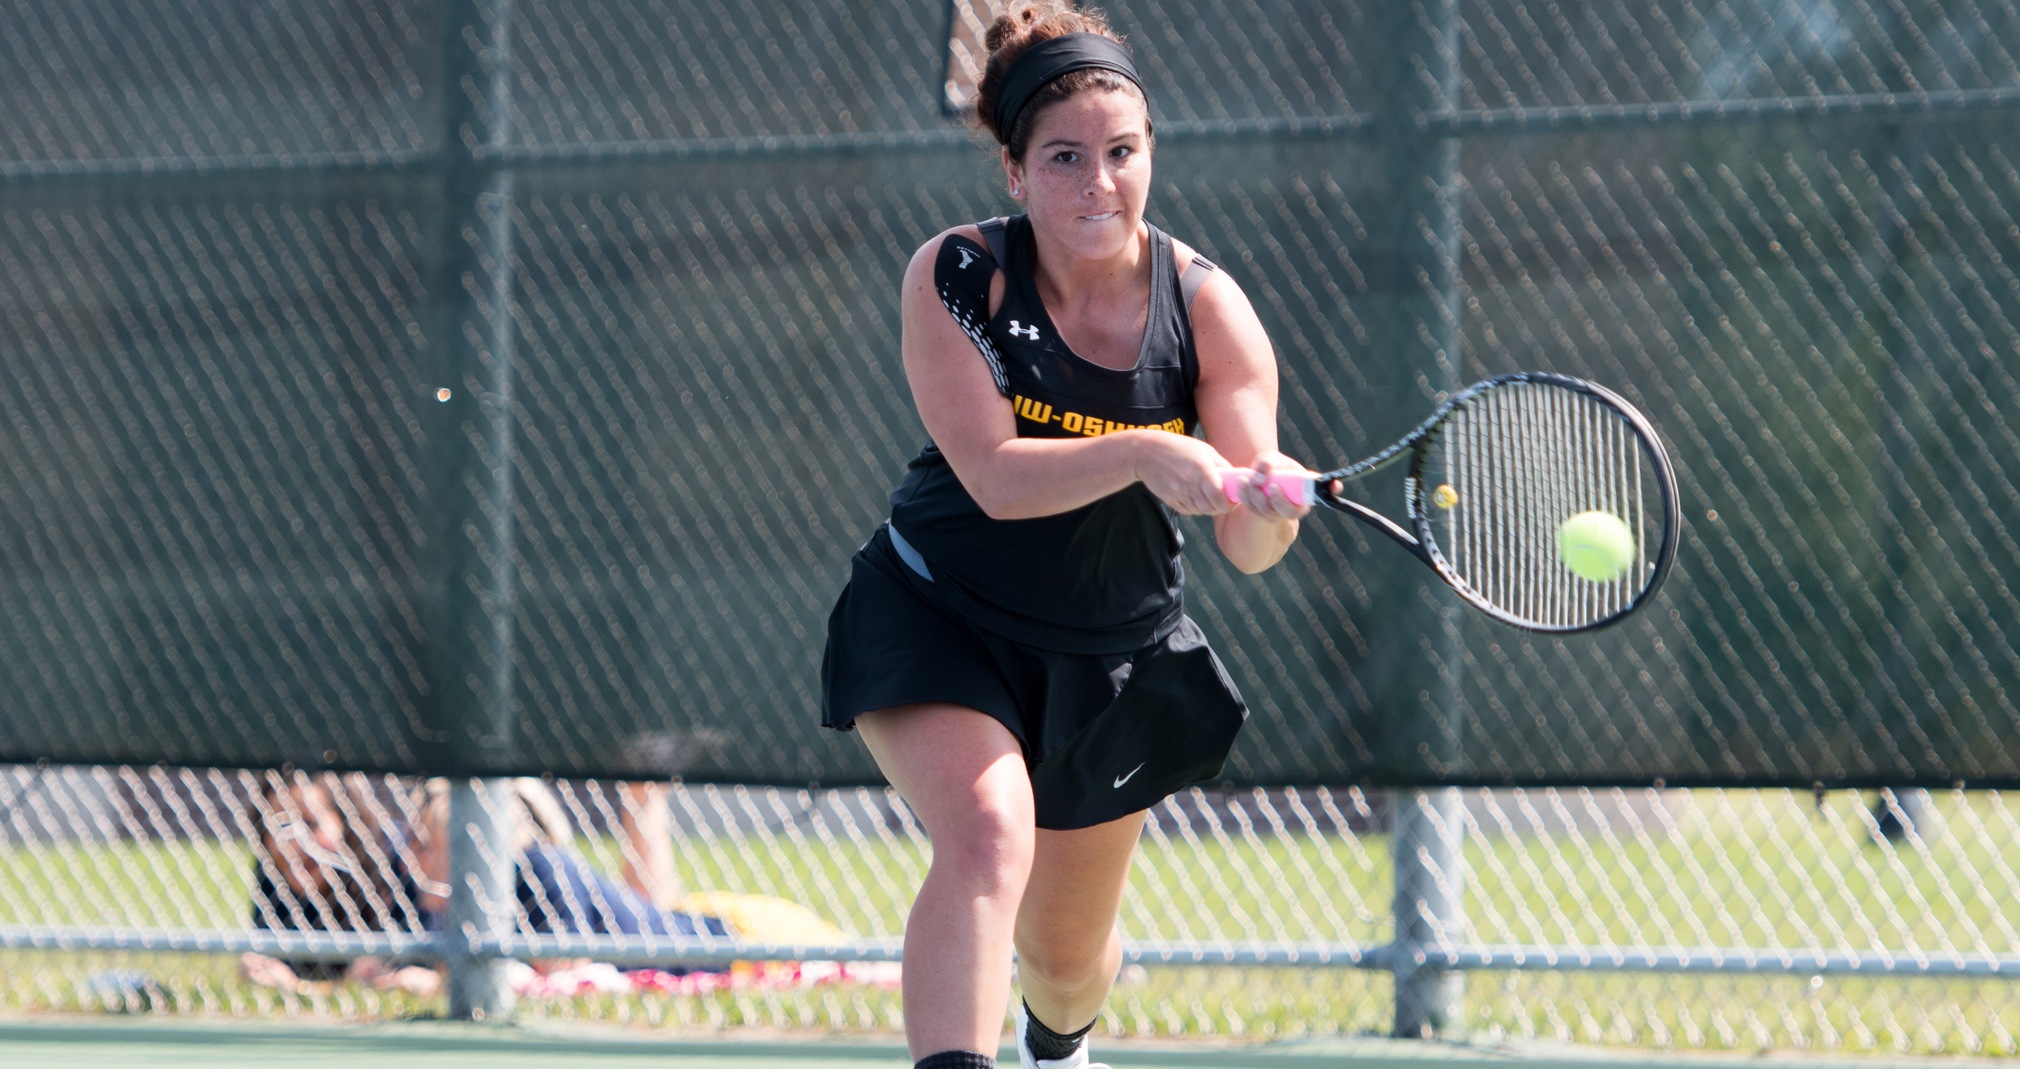 Hannah Peters earned wins against Lawrence University at both No. 3 singles and No. 1 doubles.